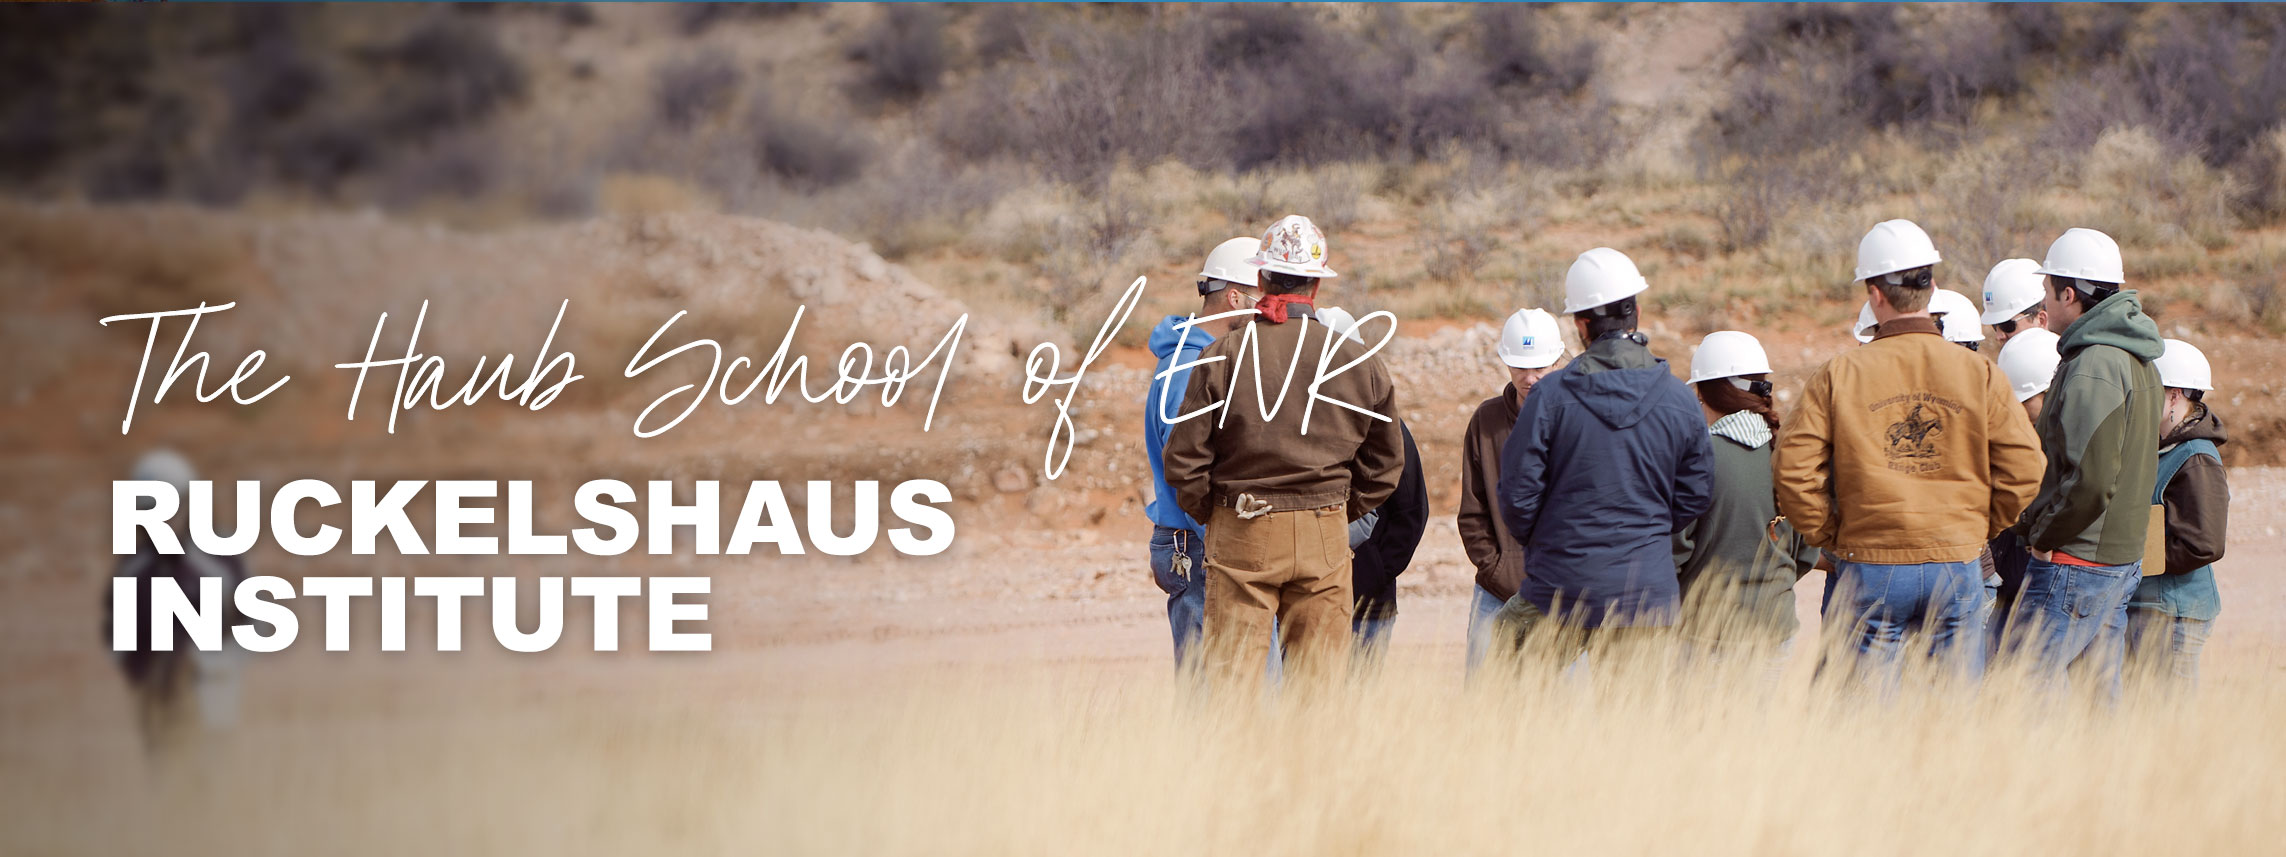 Welcome to the Haub School of ENR Ruckelshaus Institute. People wearing hardhats in field.